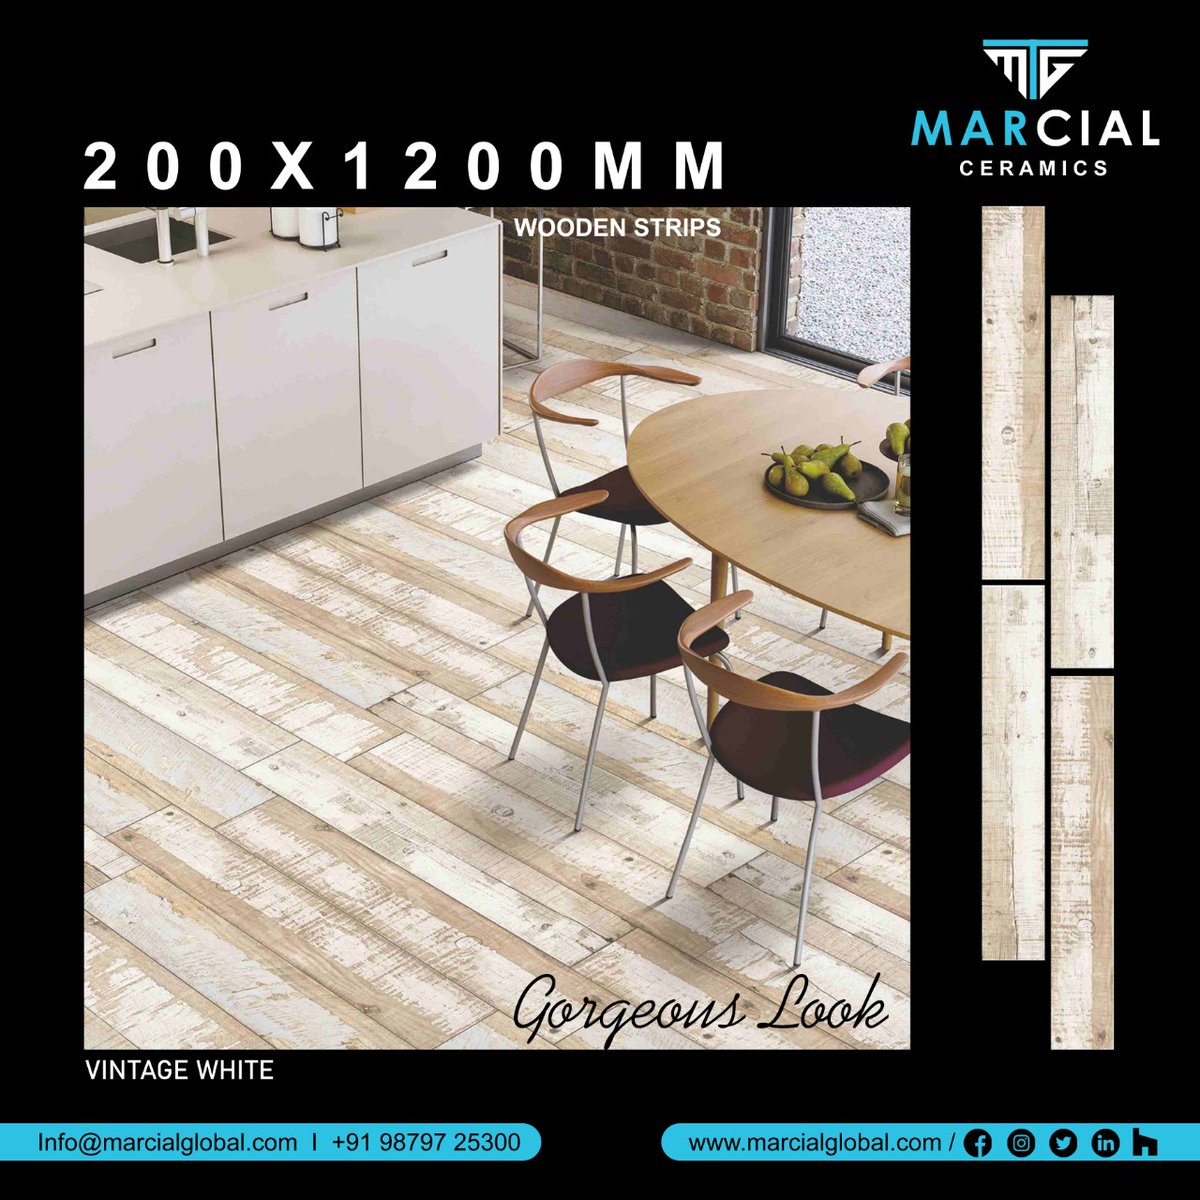 Get iconic look of wood in porcelain tiles with Exclusive design of Marcial ceramic in wood look tiles and be worry free for long time.
#woodlooktiles
#porcelaintiles
#vitrifiedtiles
#200x1200
#floortiles
#homedecor
#interiordesign
#livingspace
#marcialglobal
#madeinindia